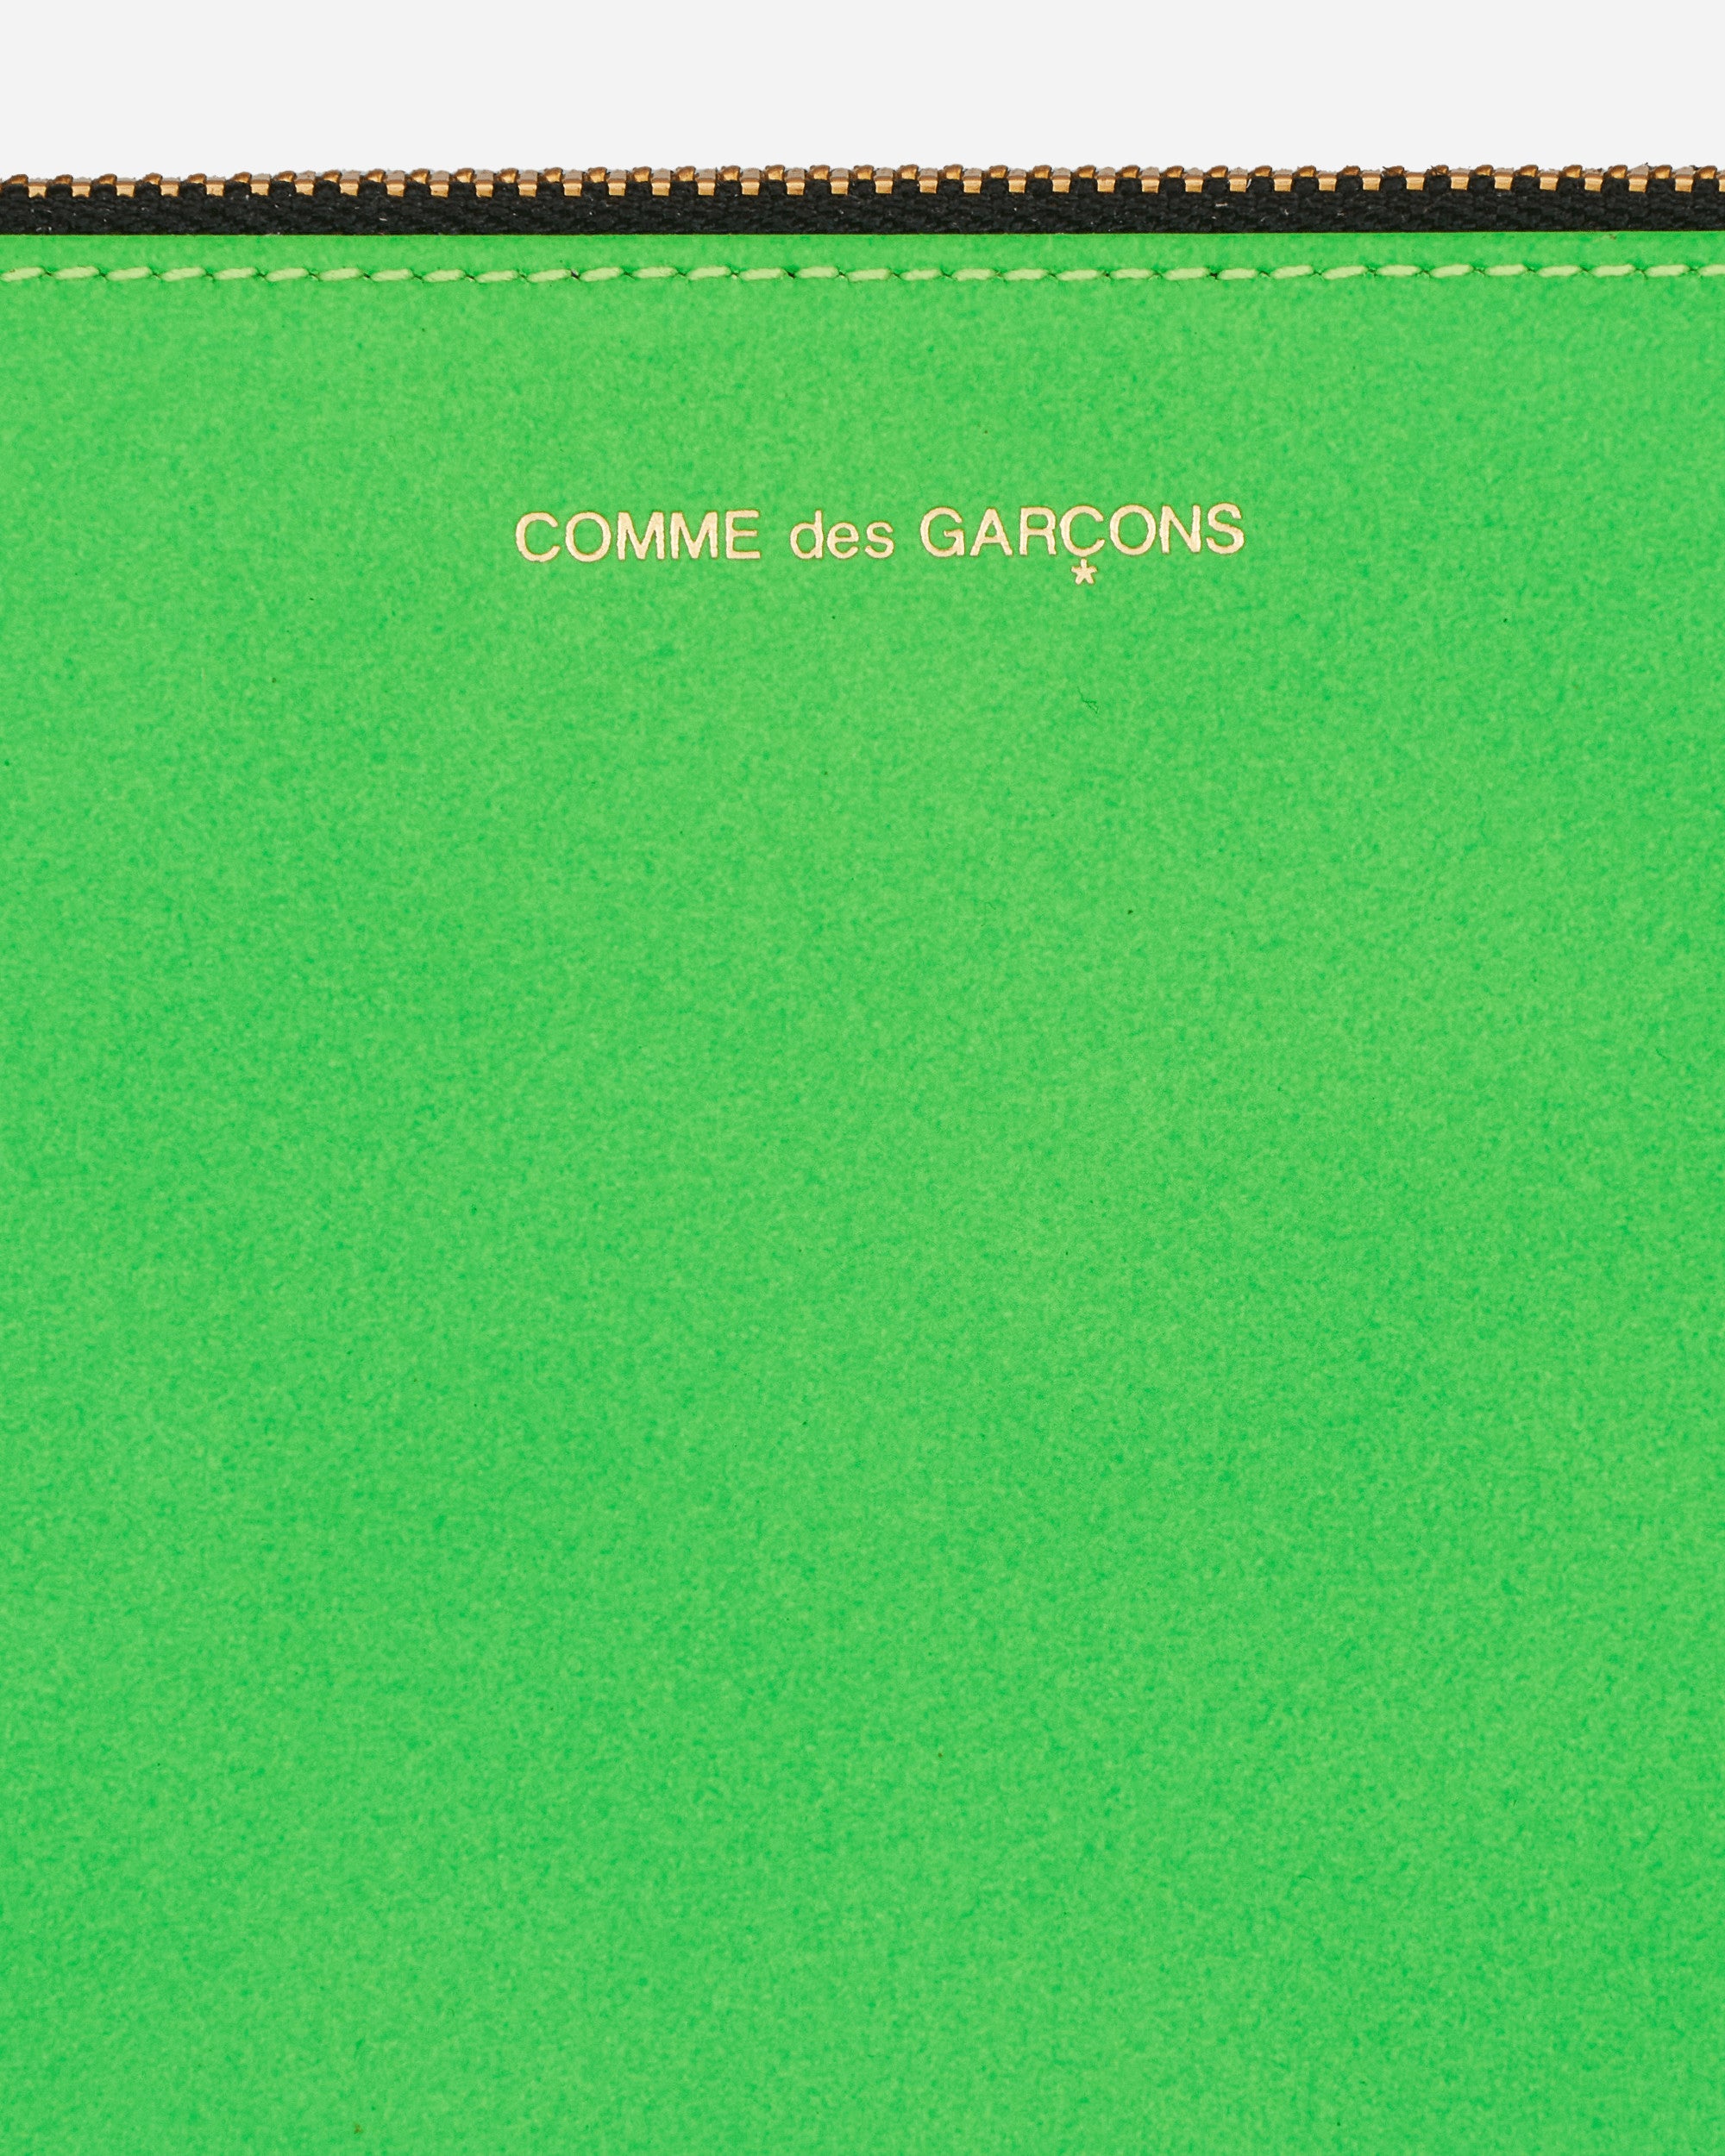 Comme Des Garçons Wallet Super Fluo Pouch Blue/Green Bags and Backpacks Pouches SA5100SF 2